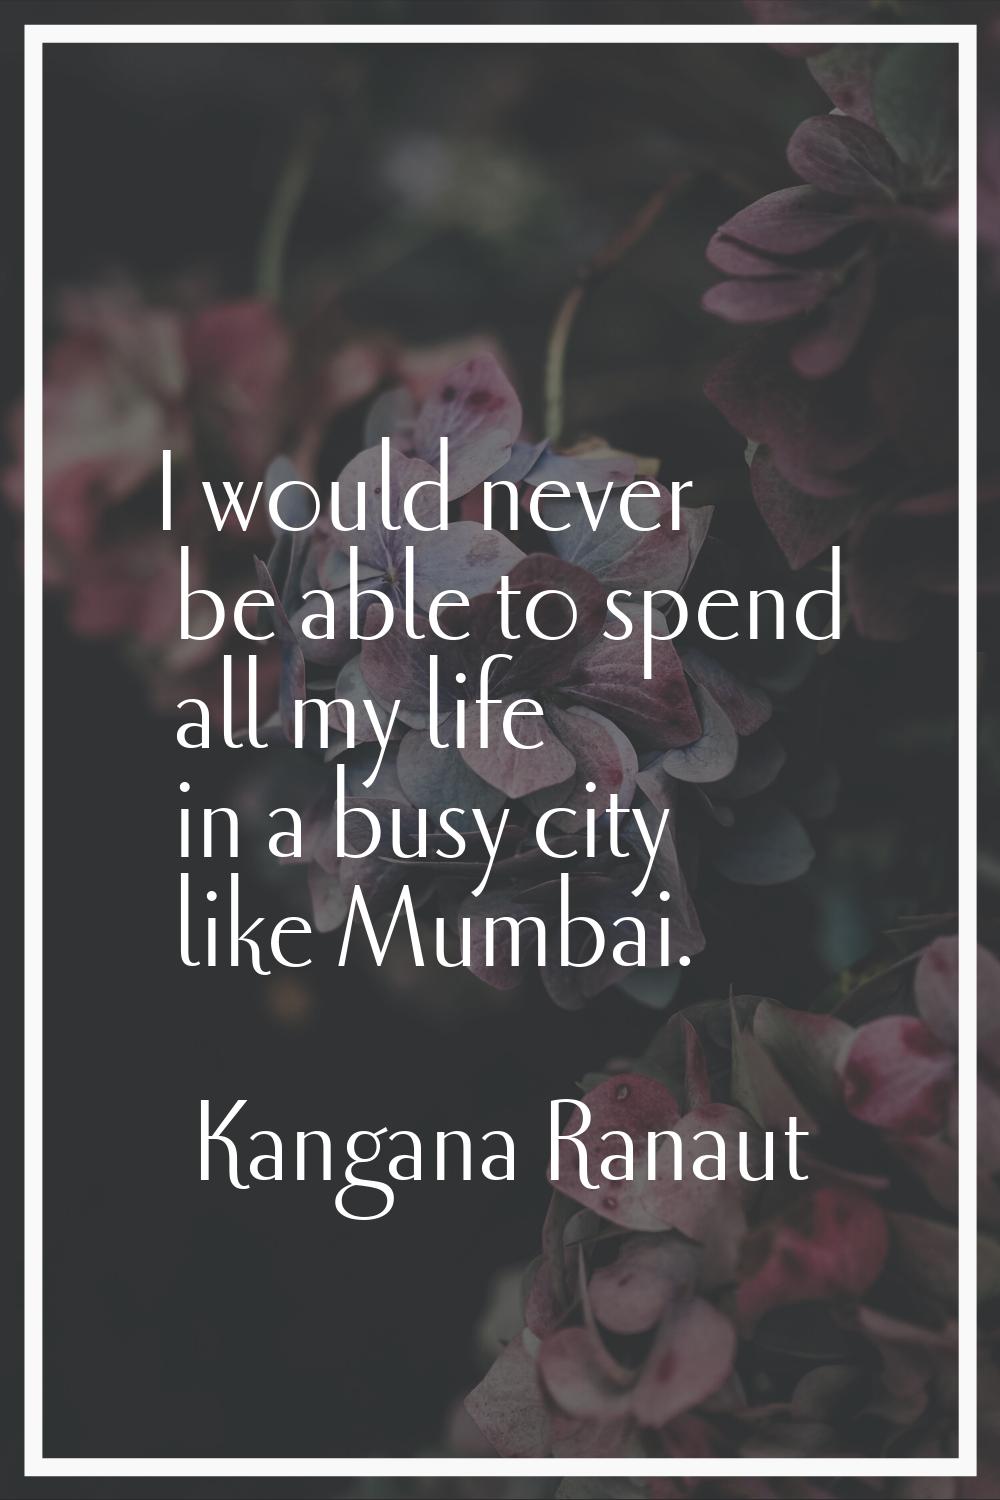 I would never be able to spend all my life in a busy city like Mumbai.